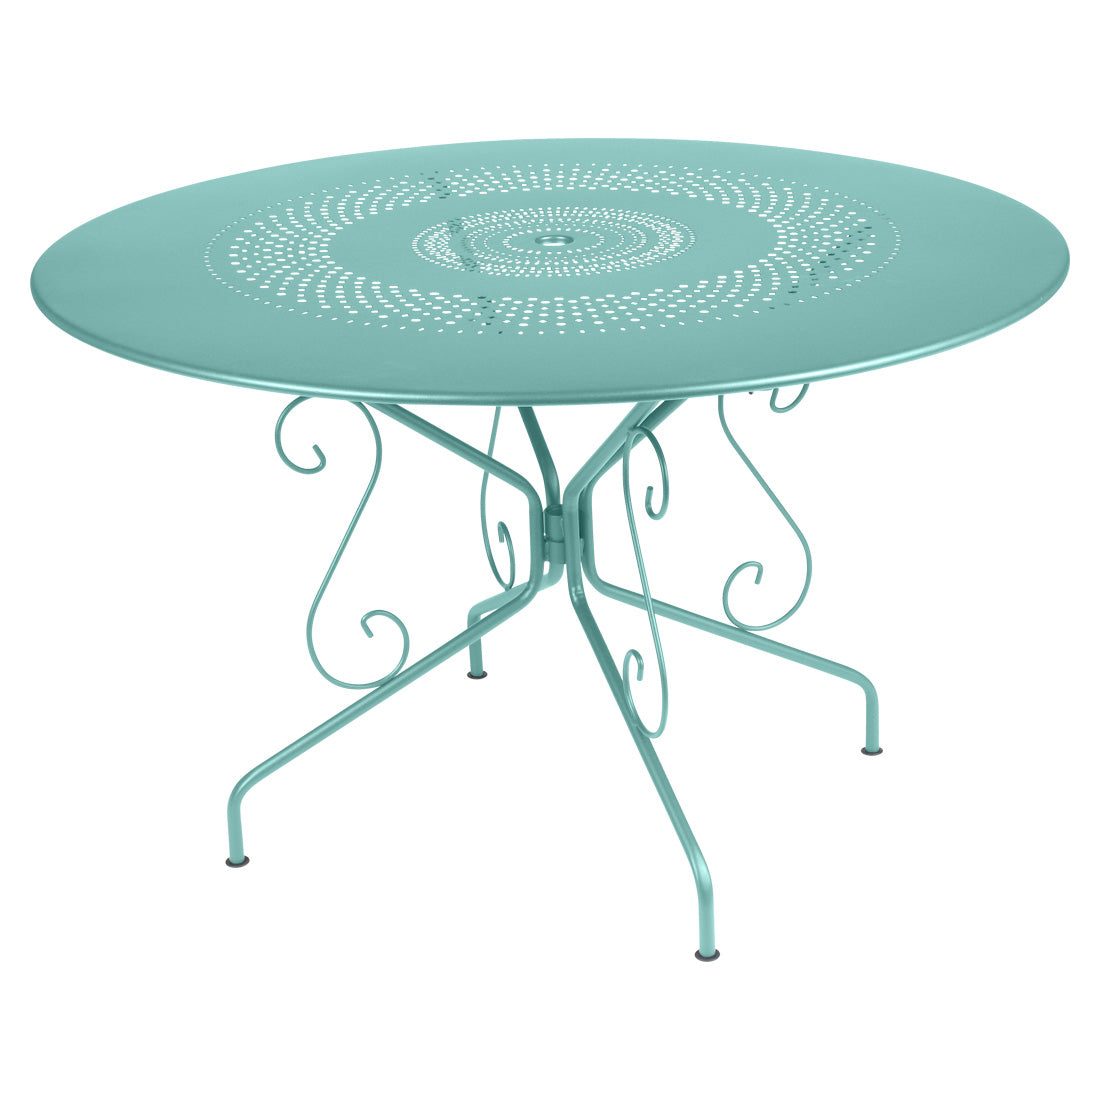 Fermob Montmartre 46 inch Round Dining Table